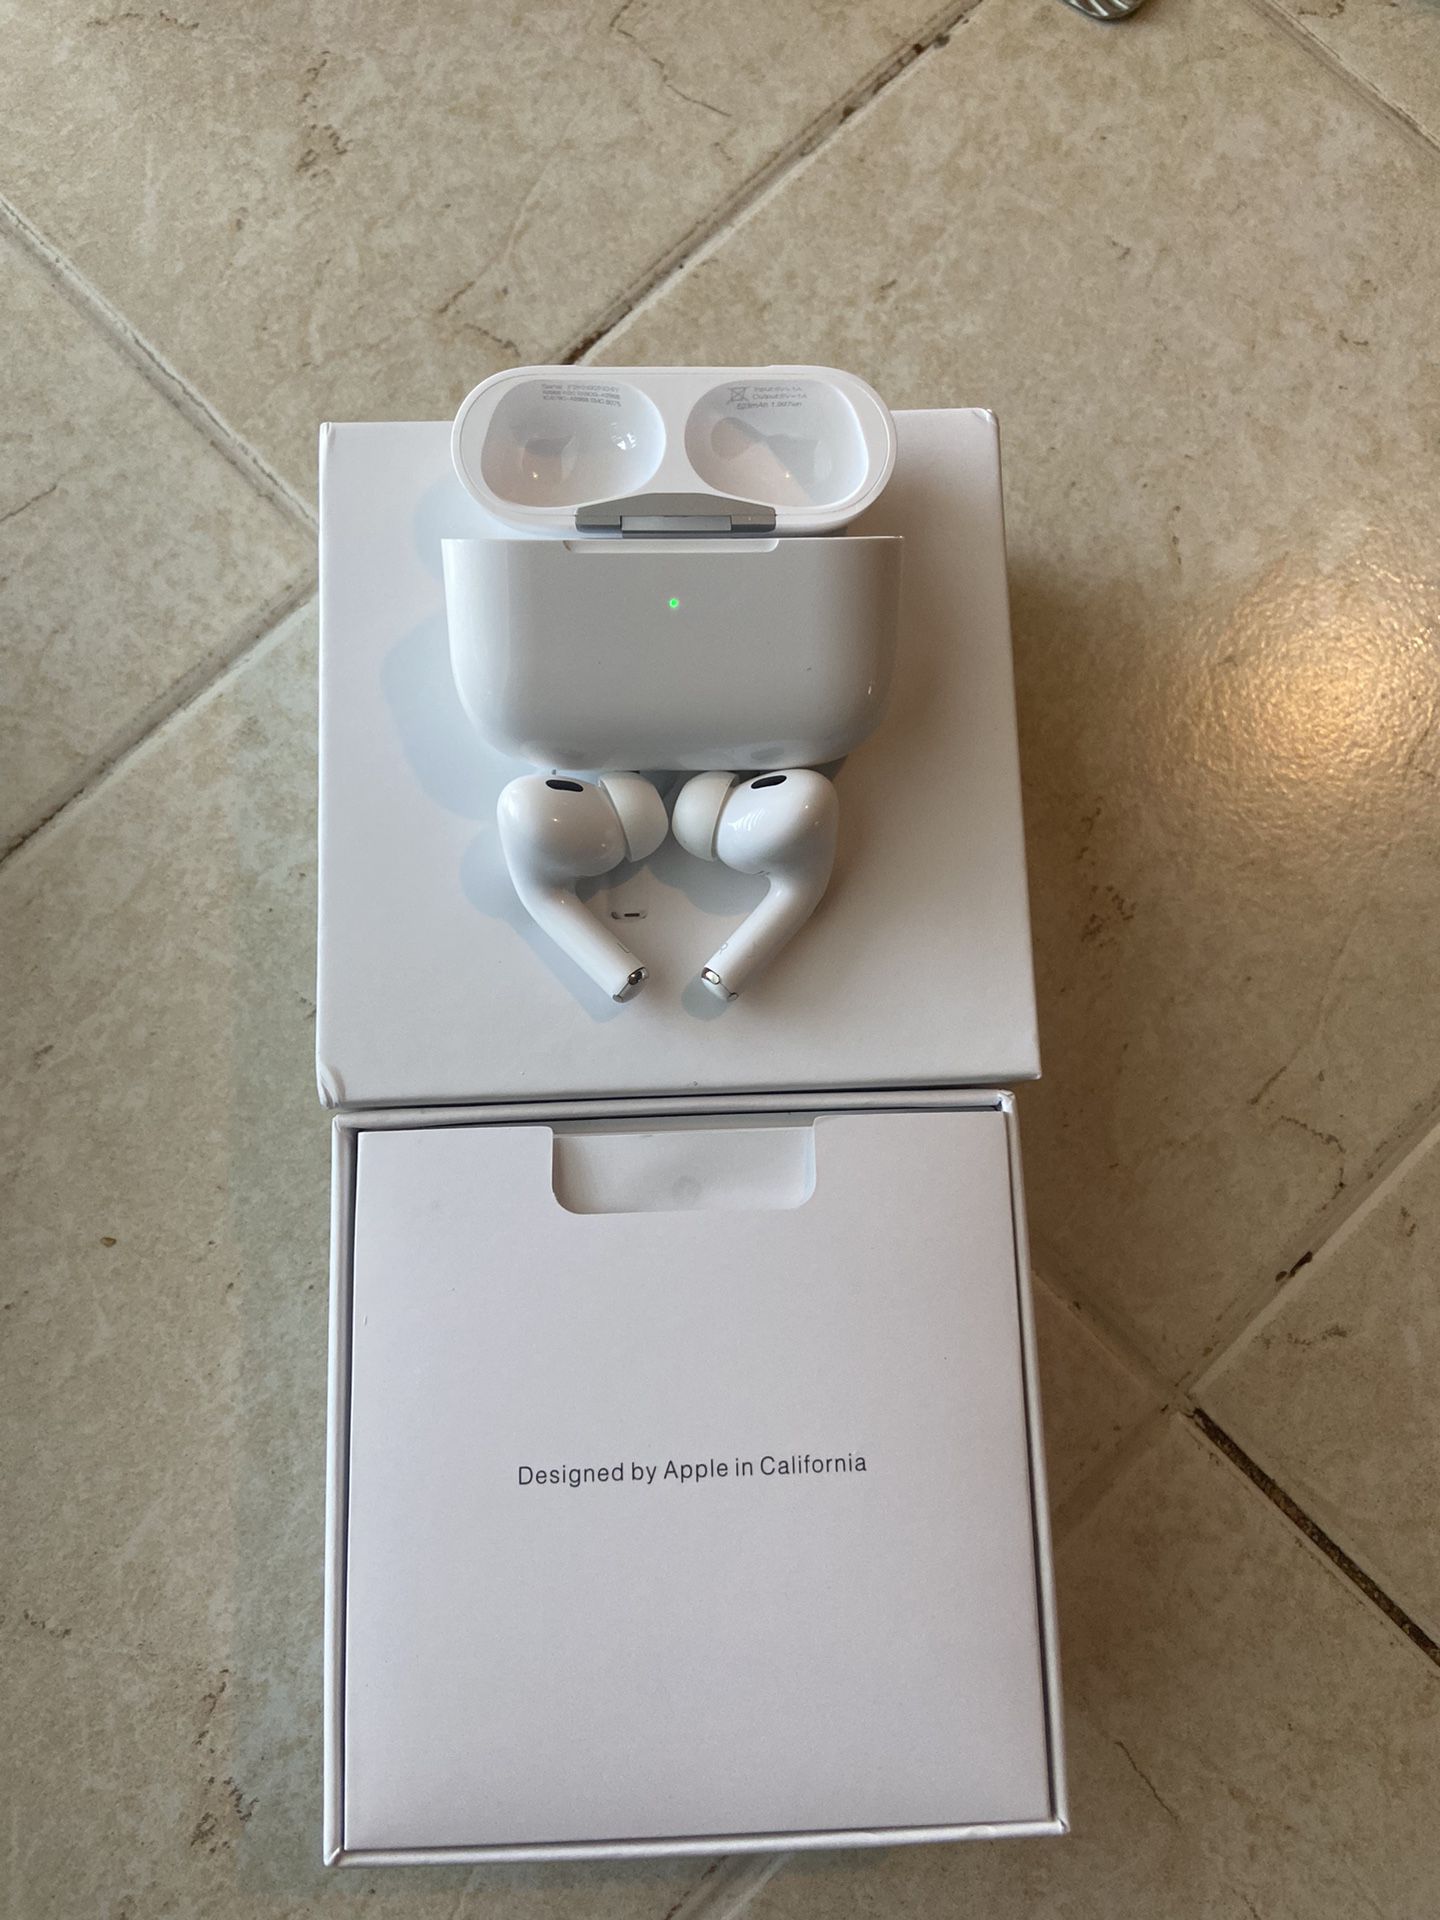 AirPods Pro Gen 2 ON SALE RIGHT NOW!